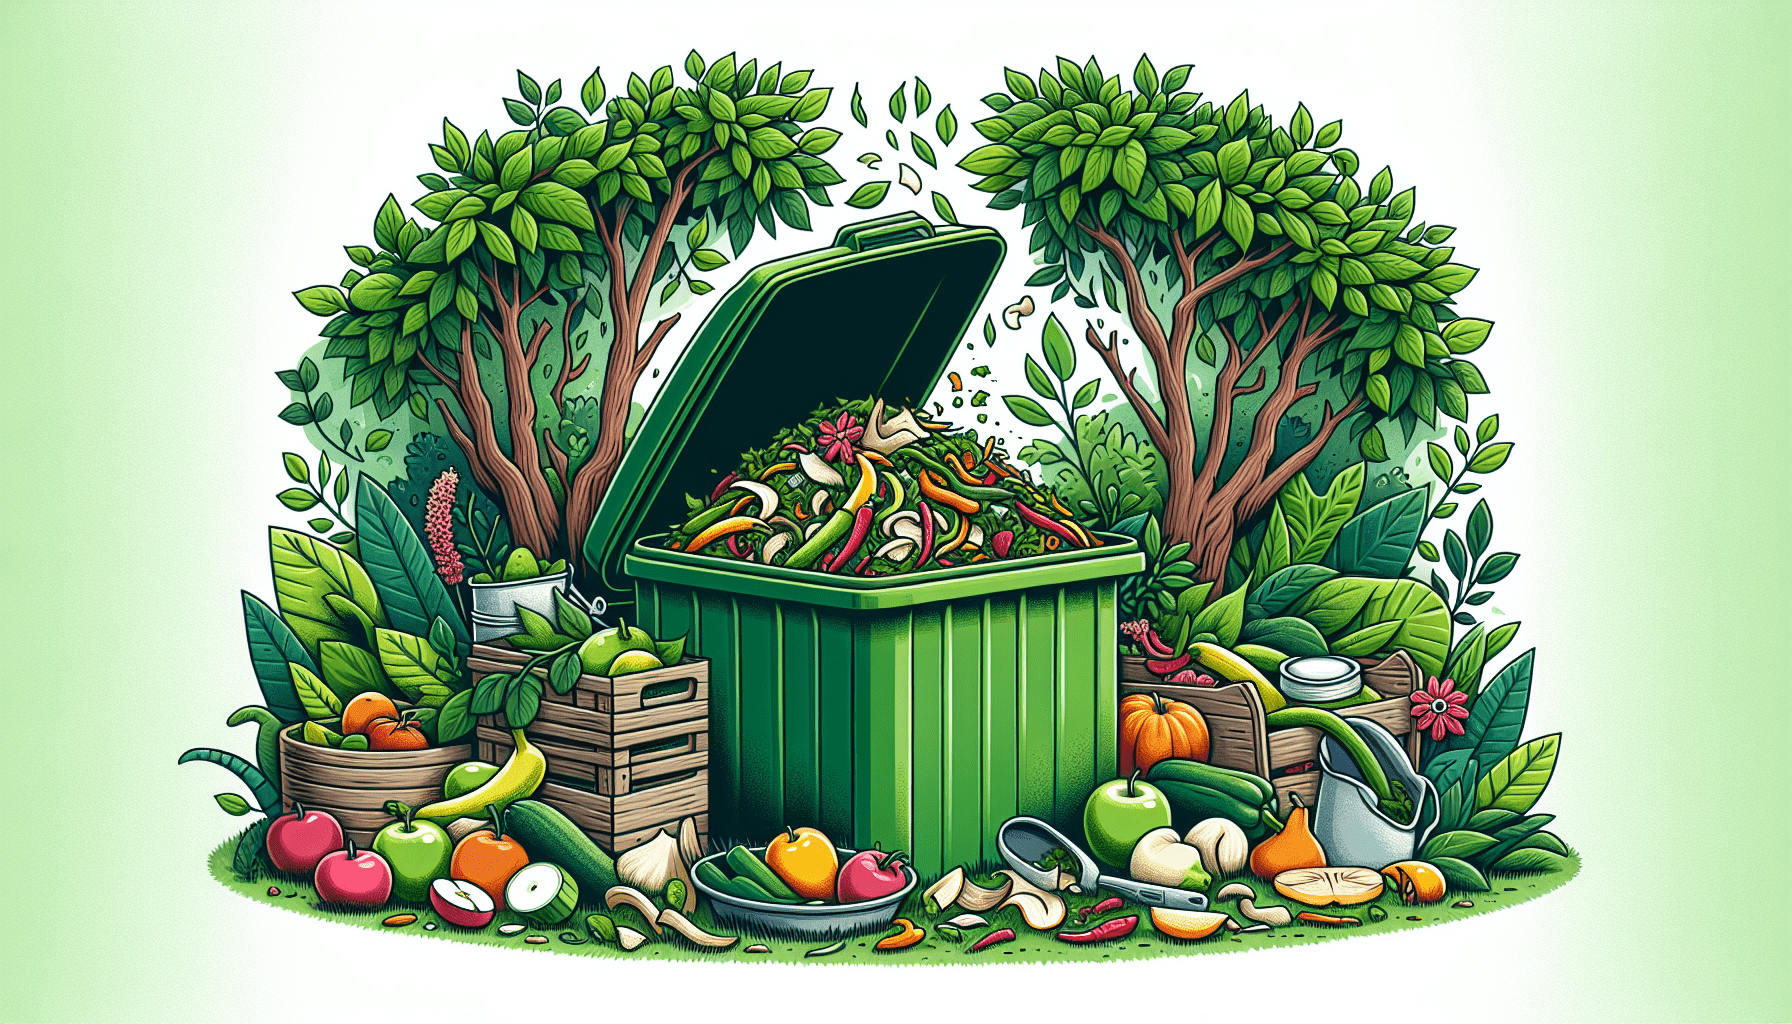 What Are The Benefits Of Composting?